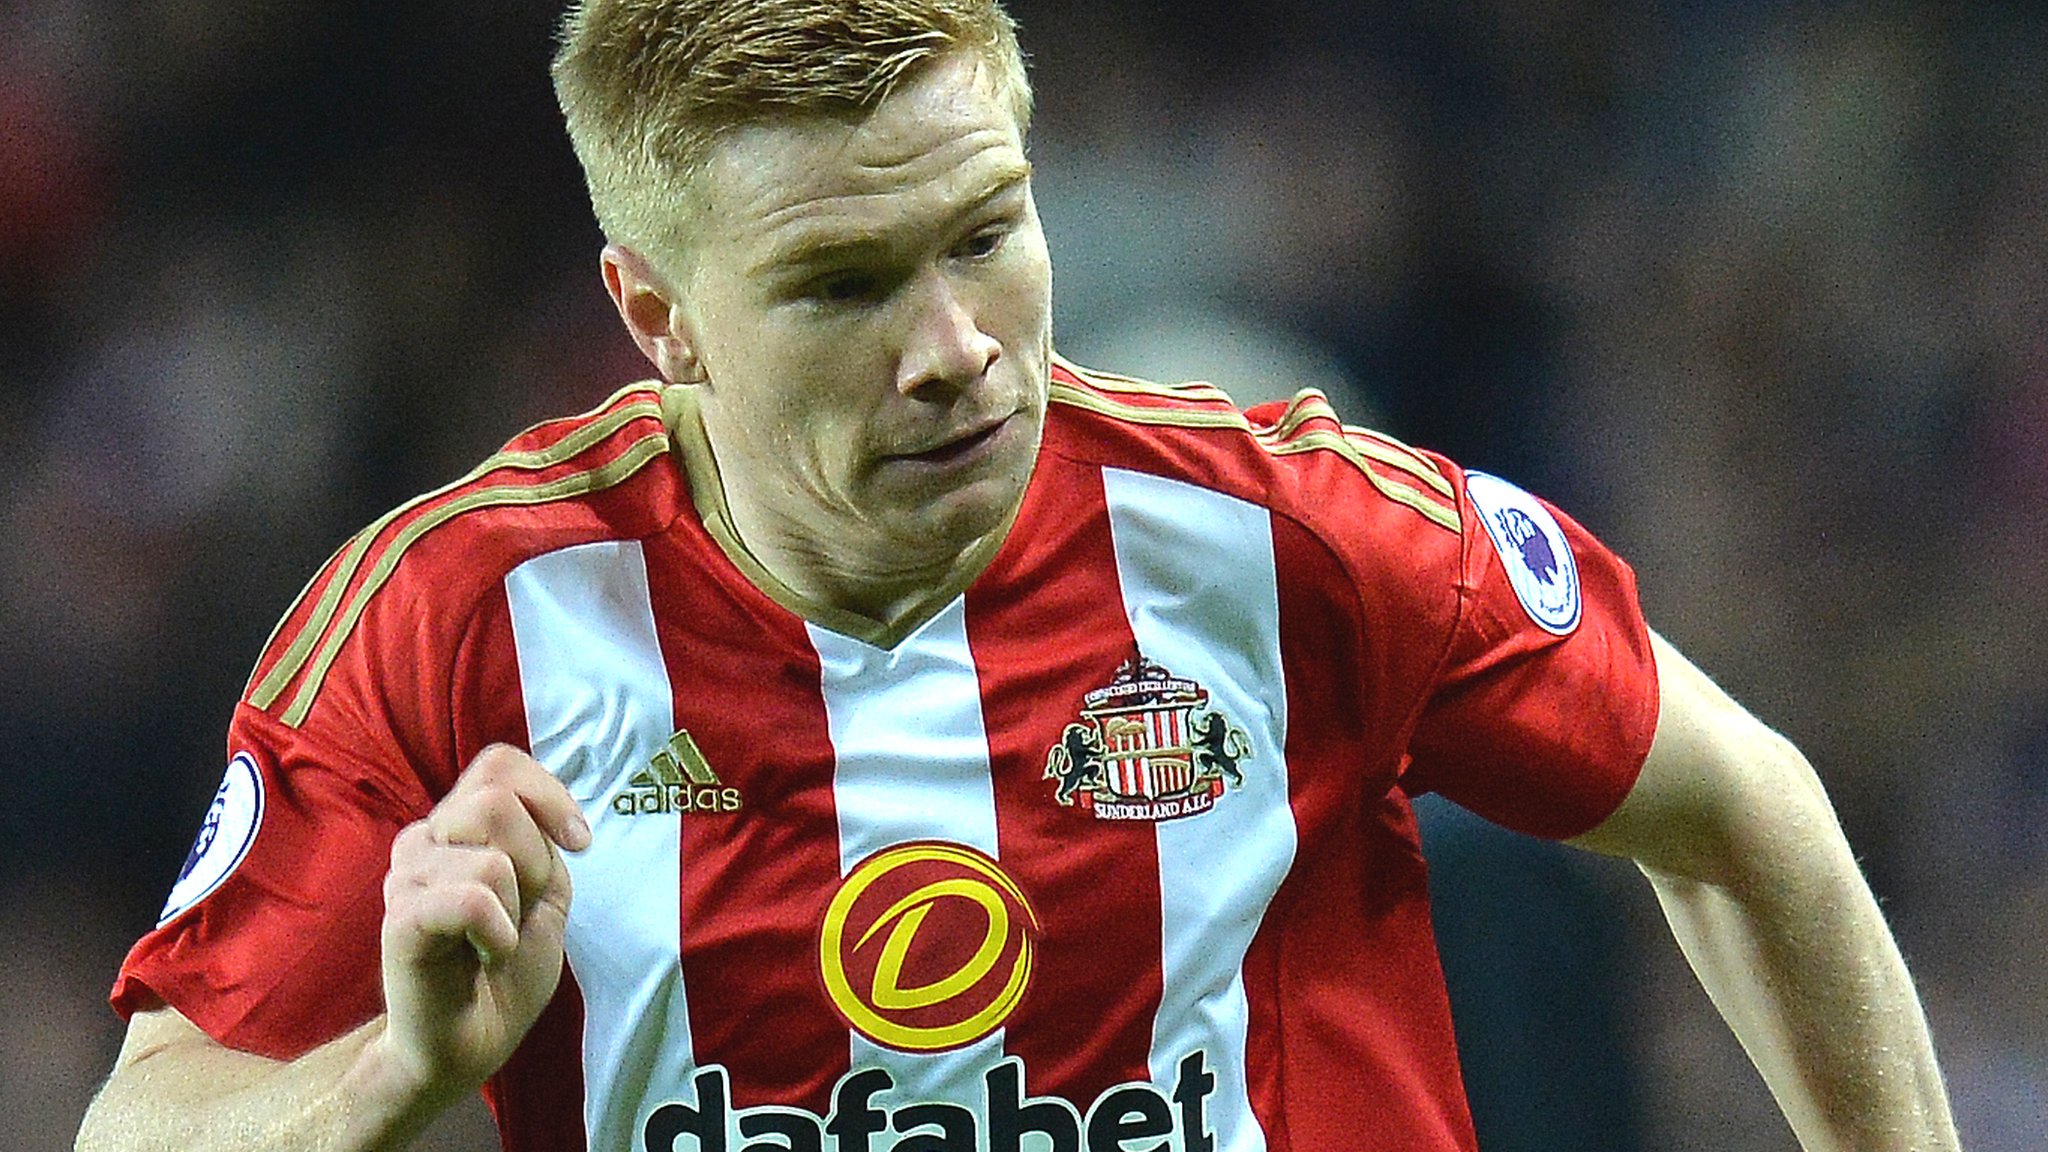 'How classy is that?' Real Madrid send letter of support to injured Watmore